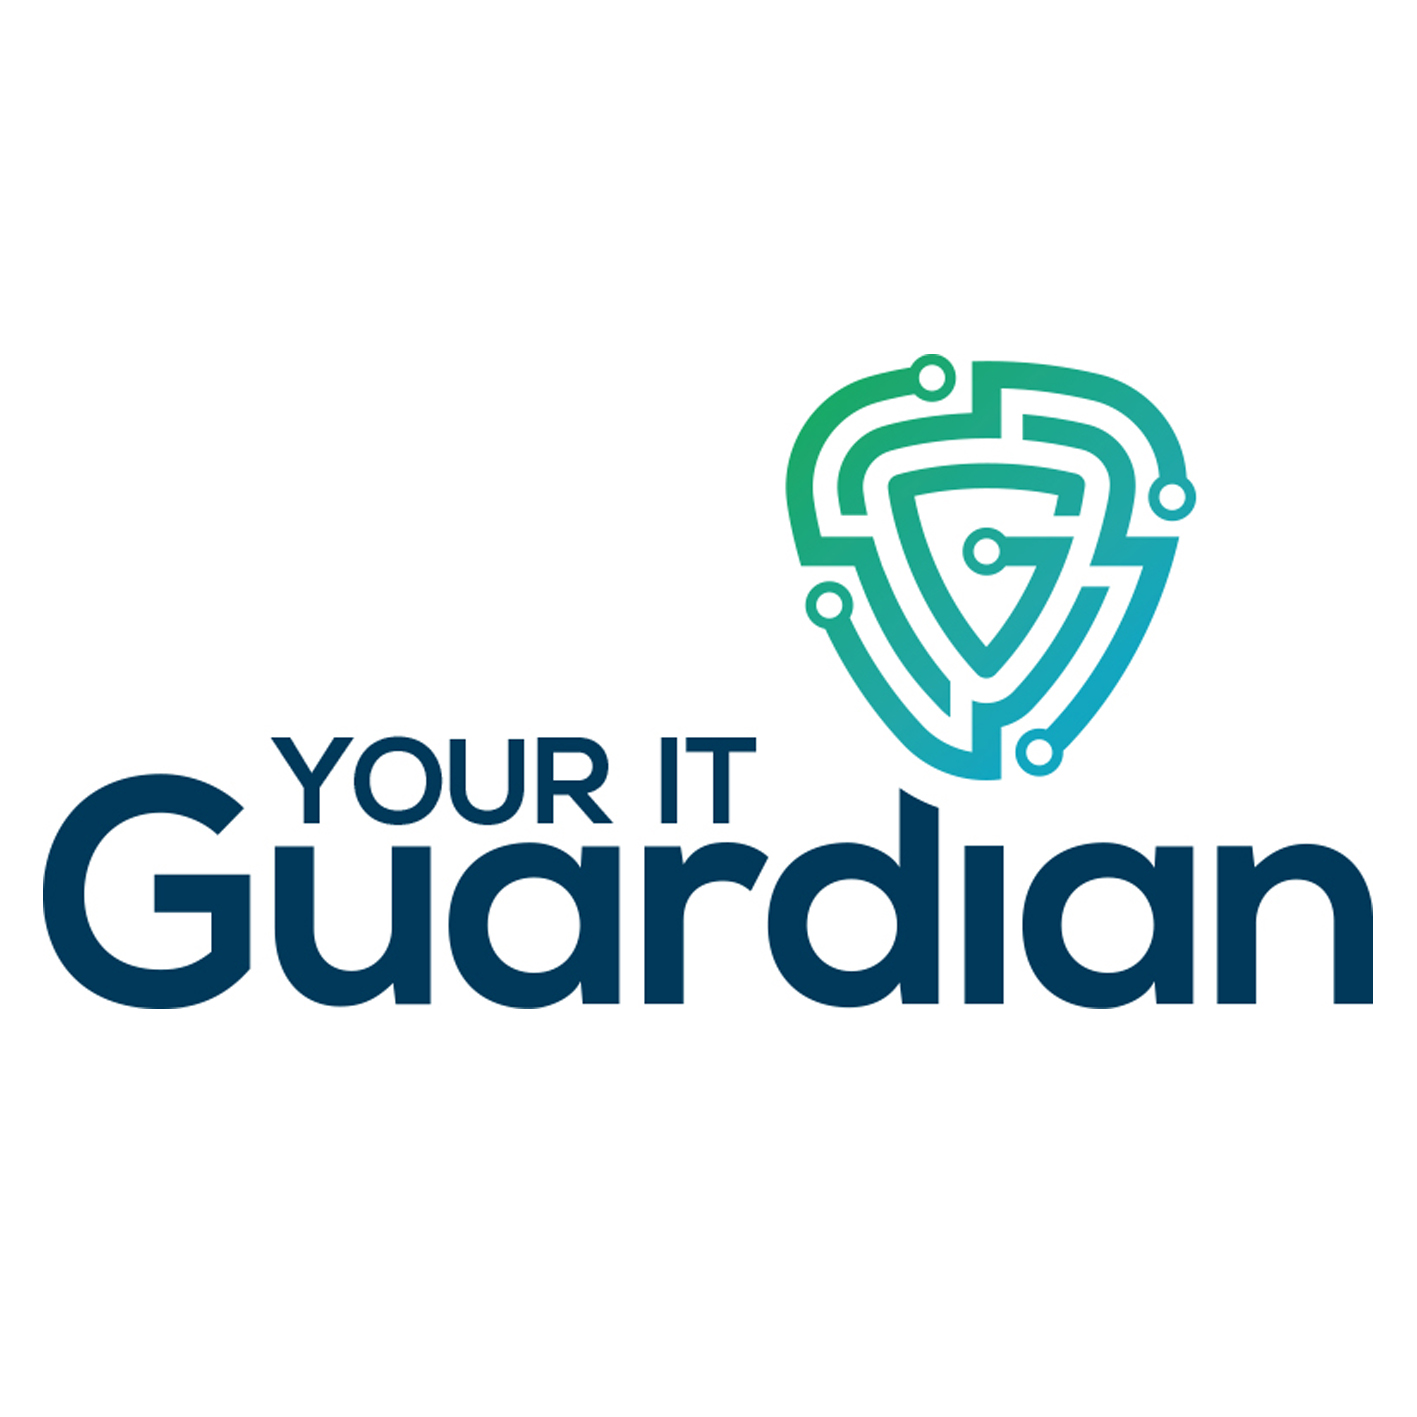 Your IT guardian